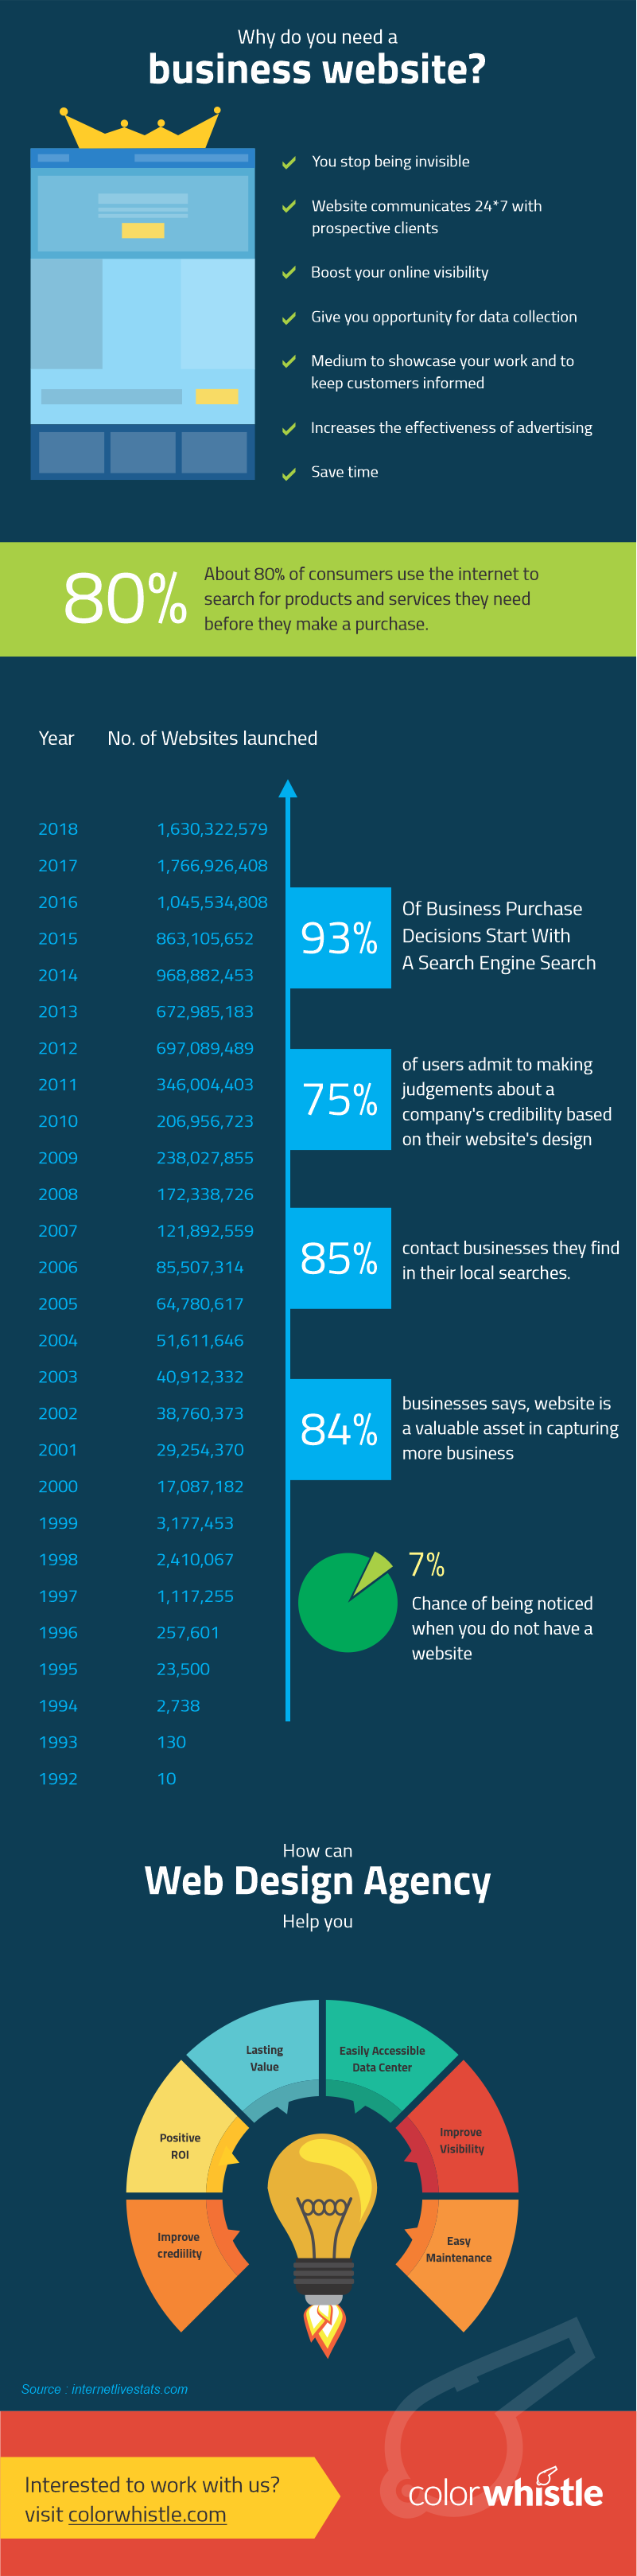 Why Businesses Need Website Infographic by ColorWhistle